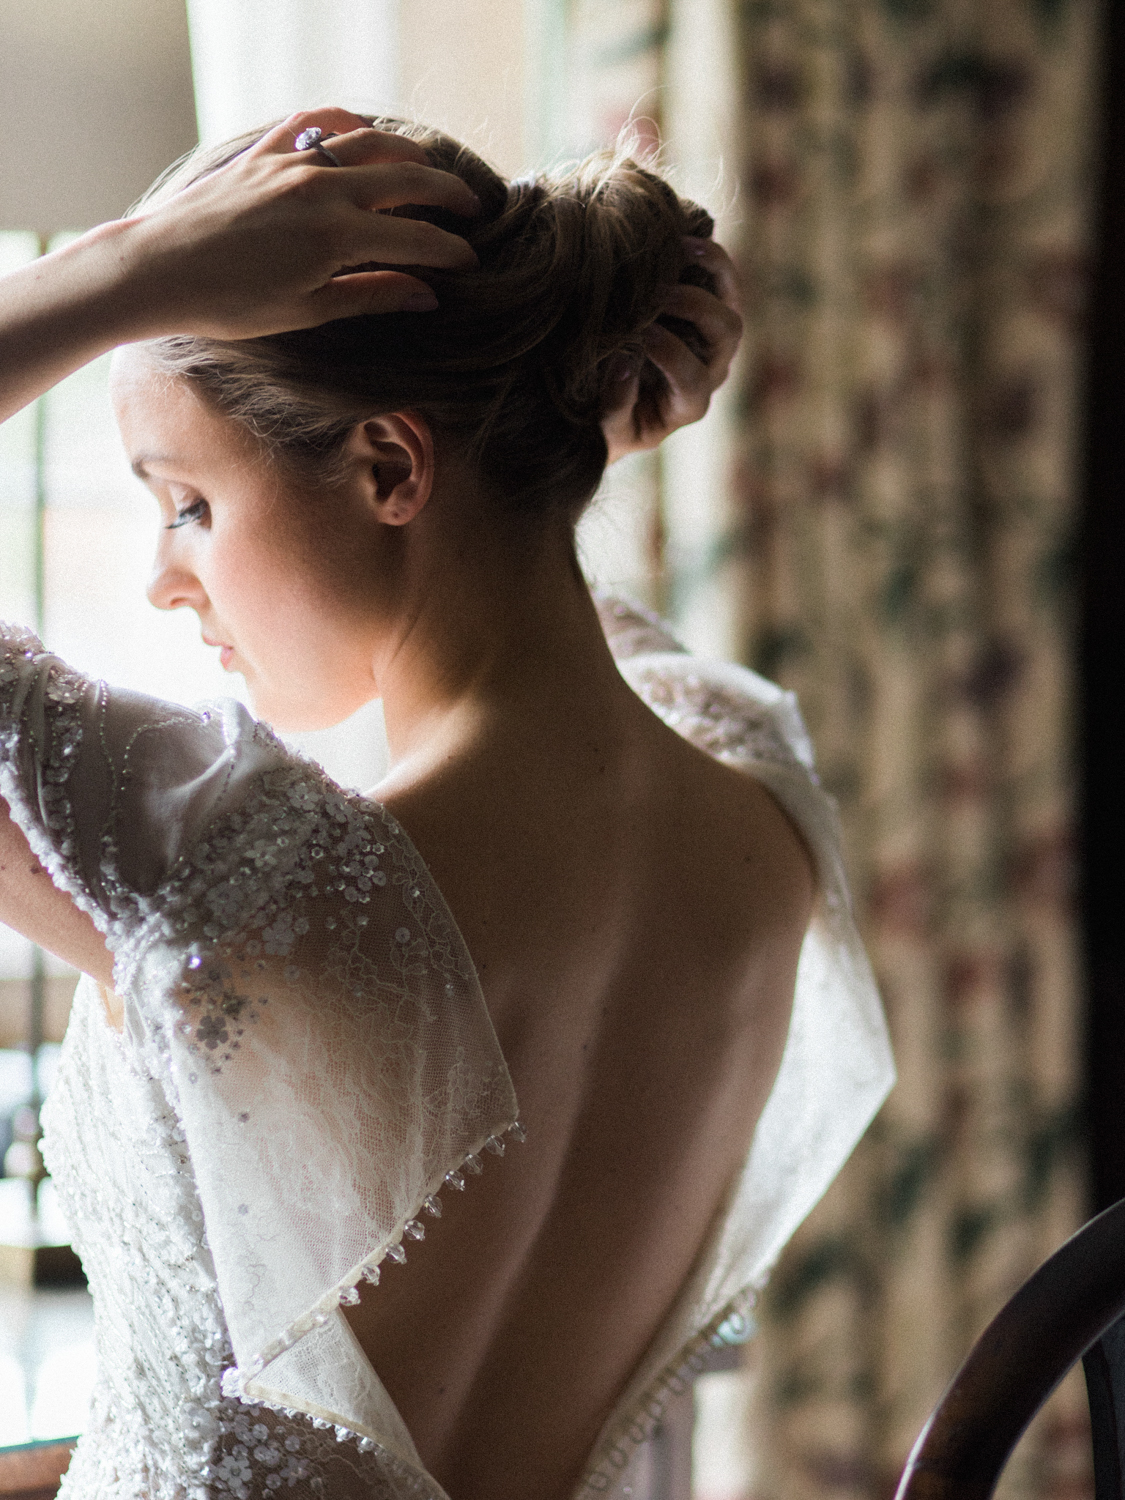 Bridal preparation at Dorfold Hall by fine art wedding photographer based in the UK.